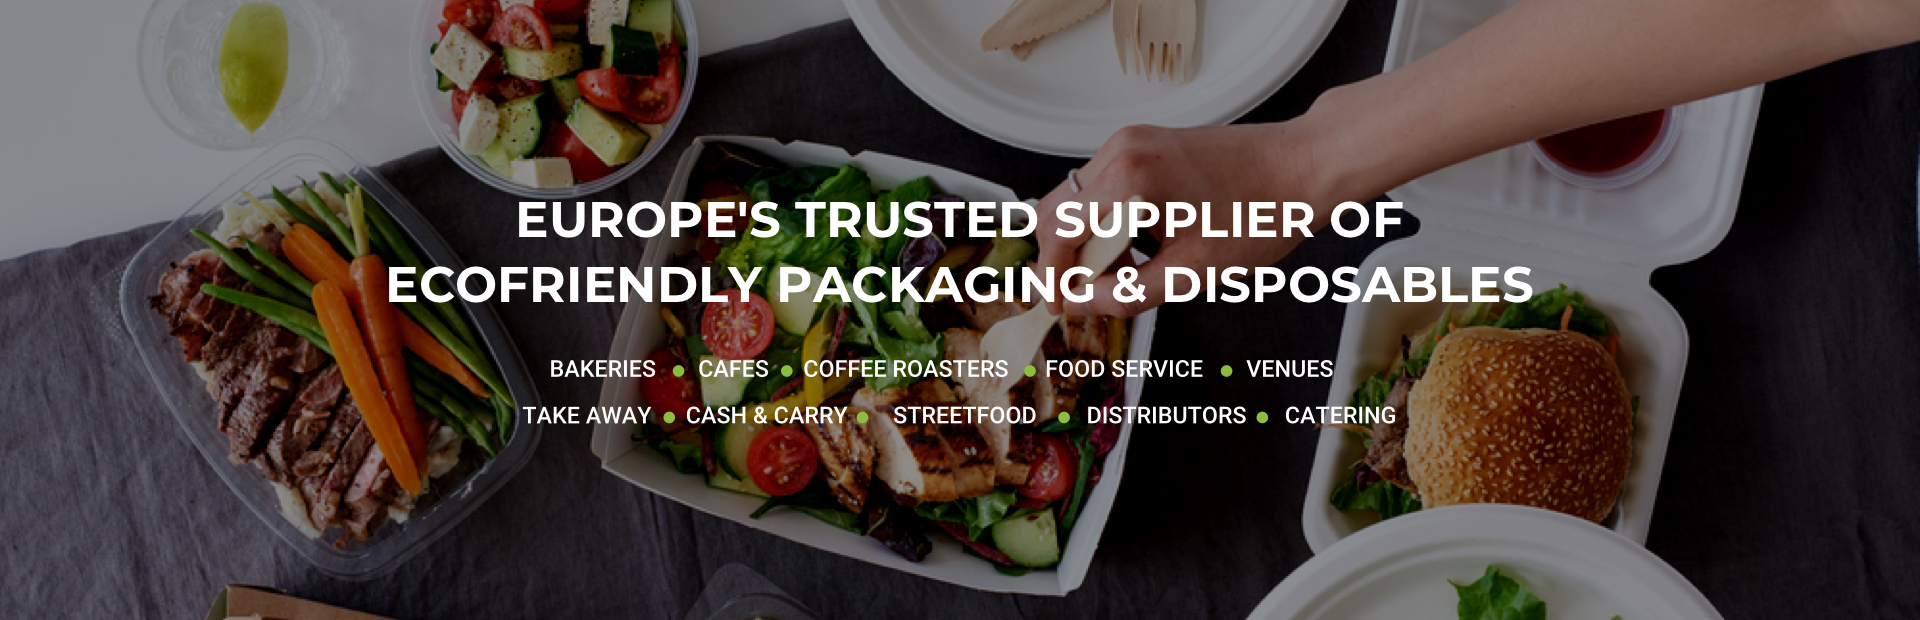 Europe's Trusted Supplier of Ecofriendly Packaging & Disposables